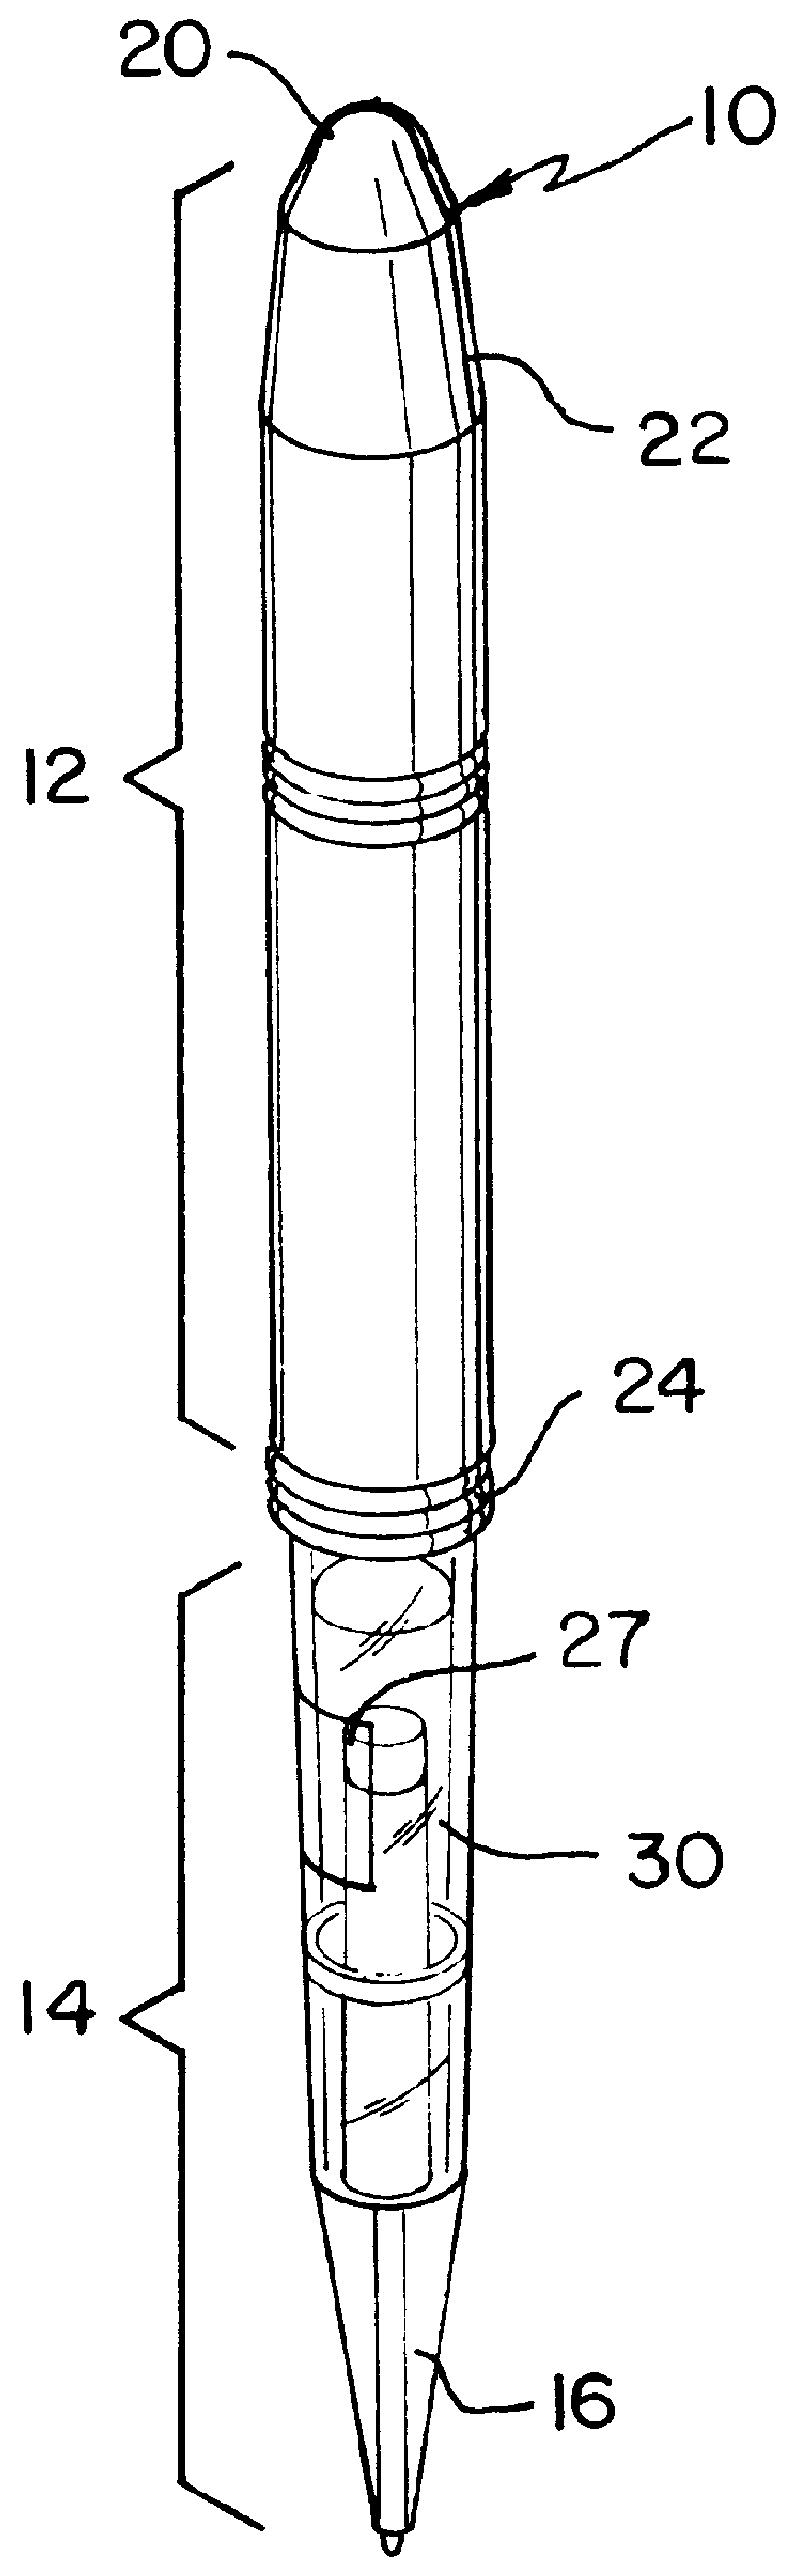 Pen with self-contained illumination